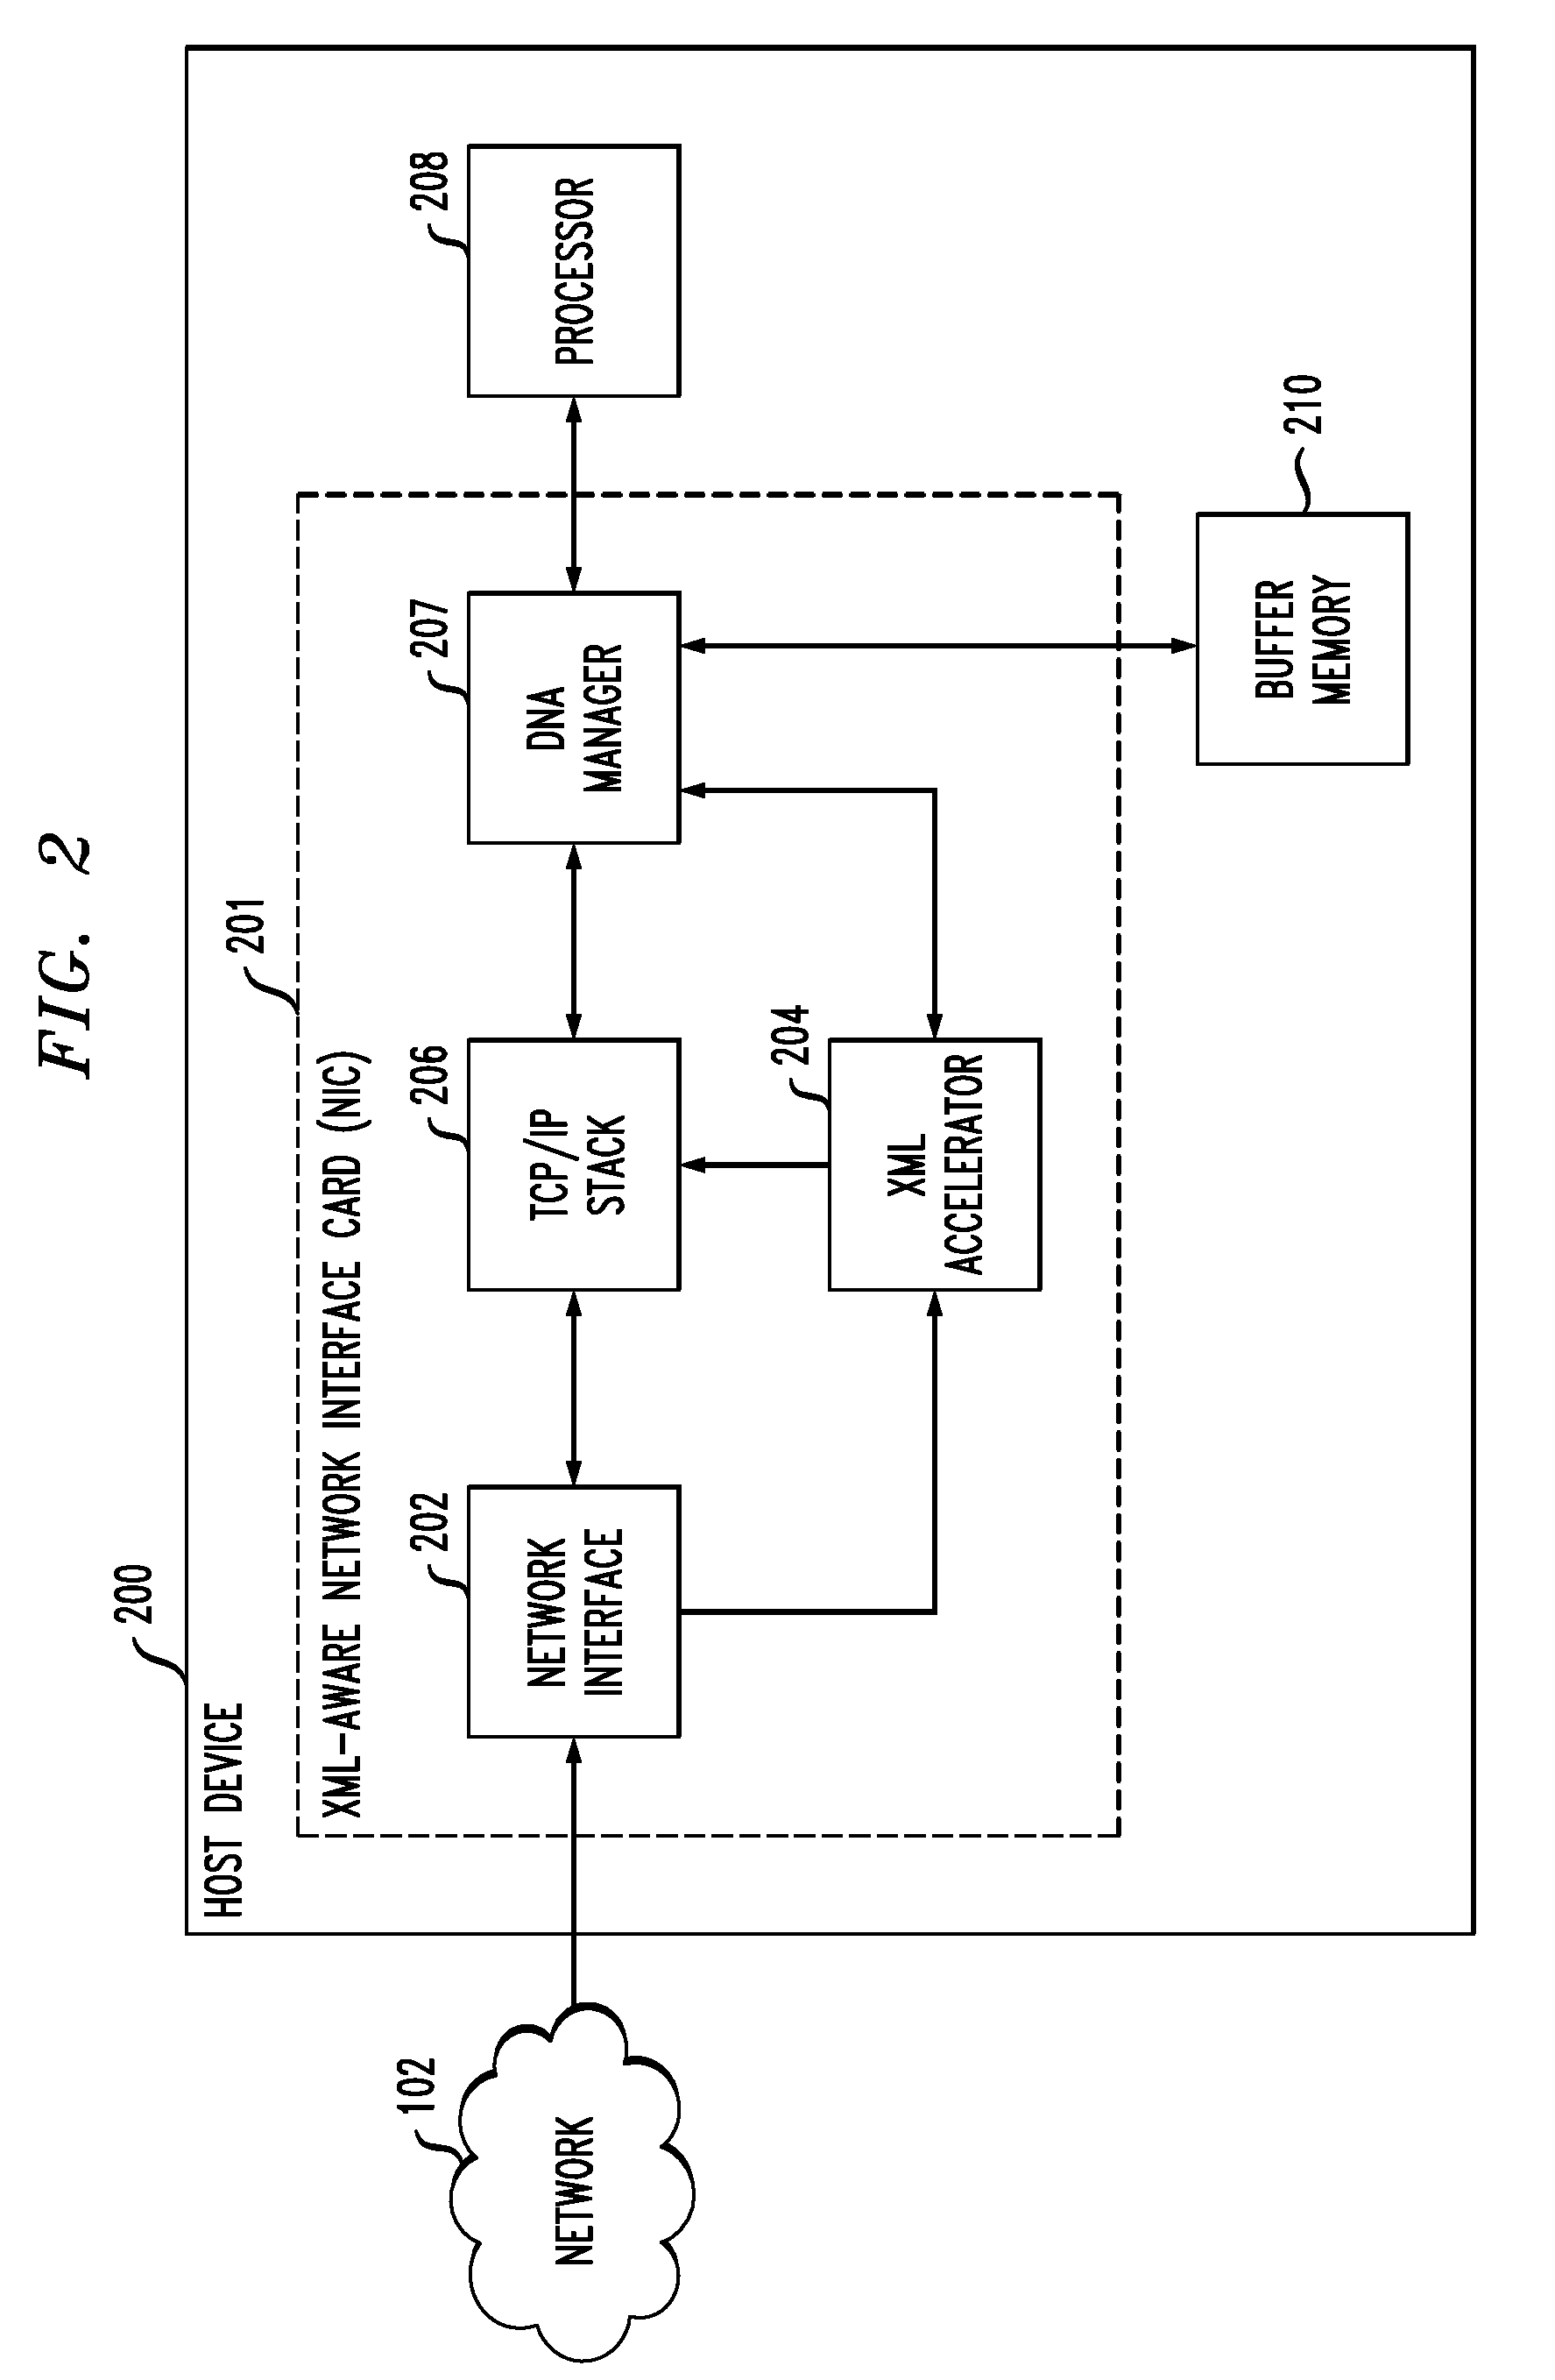 Network Interface for Accelerating XML Processing